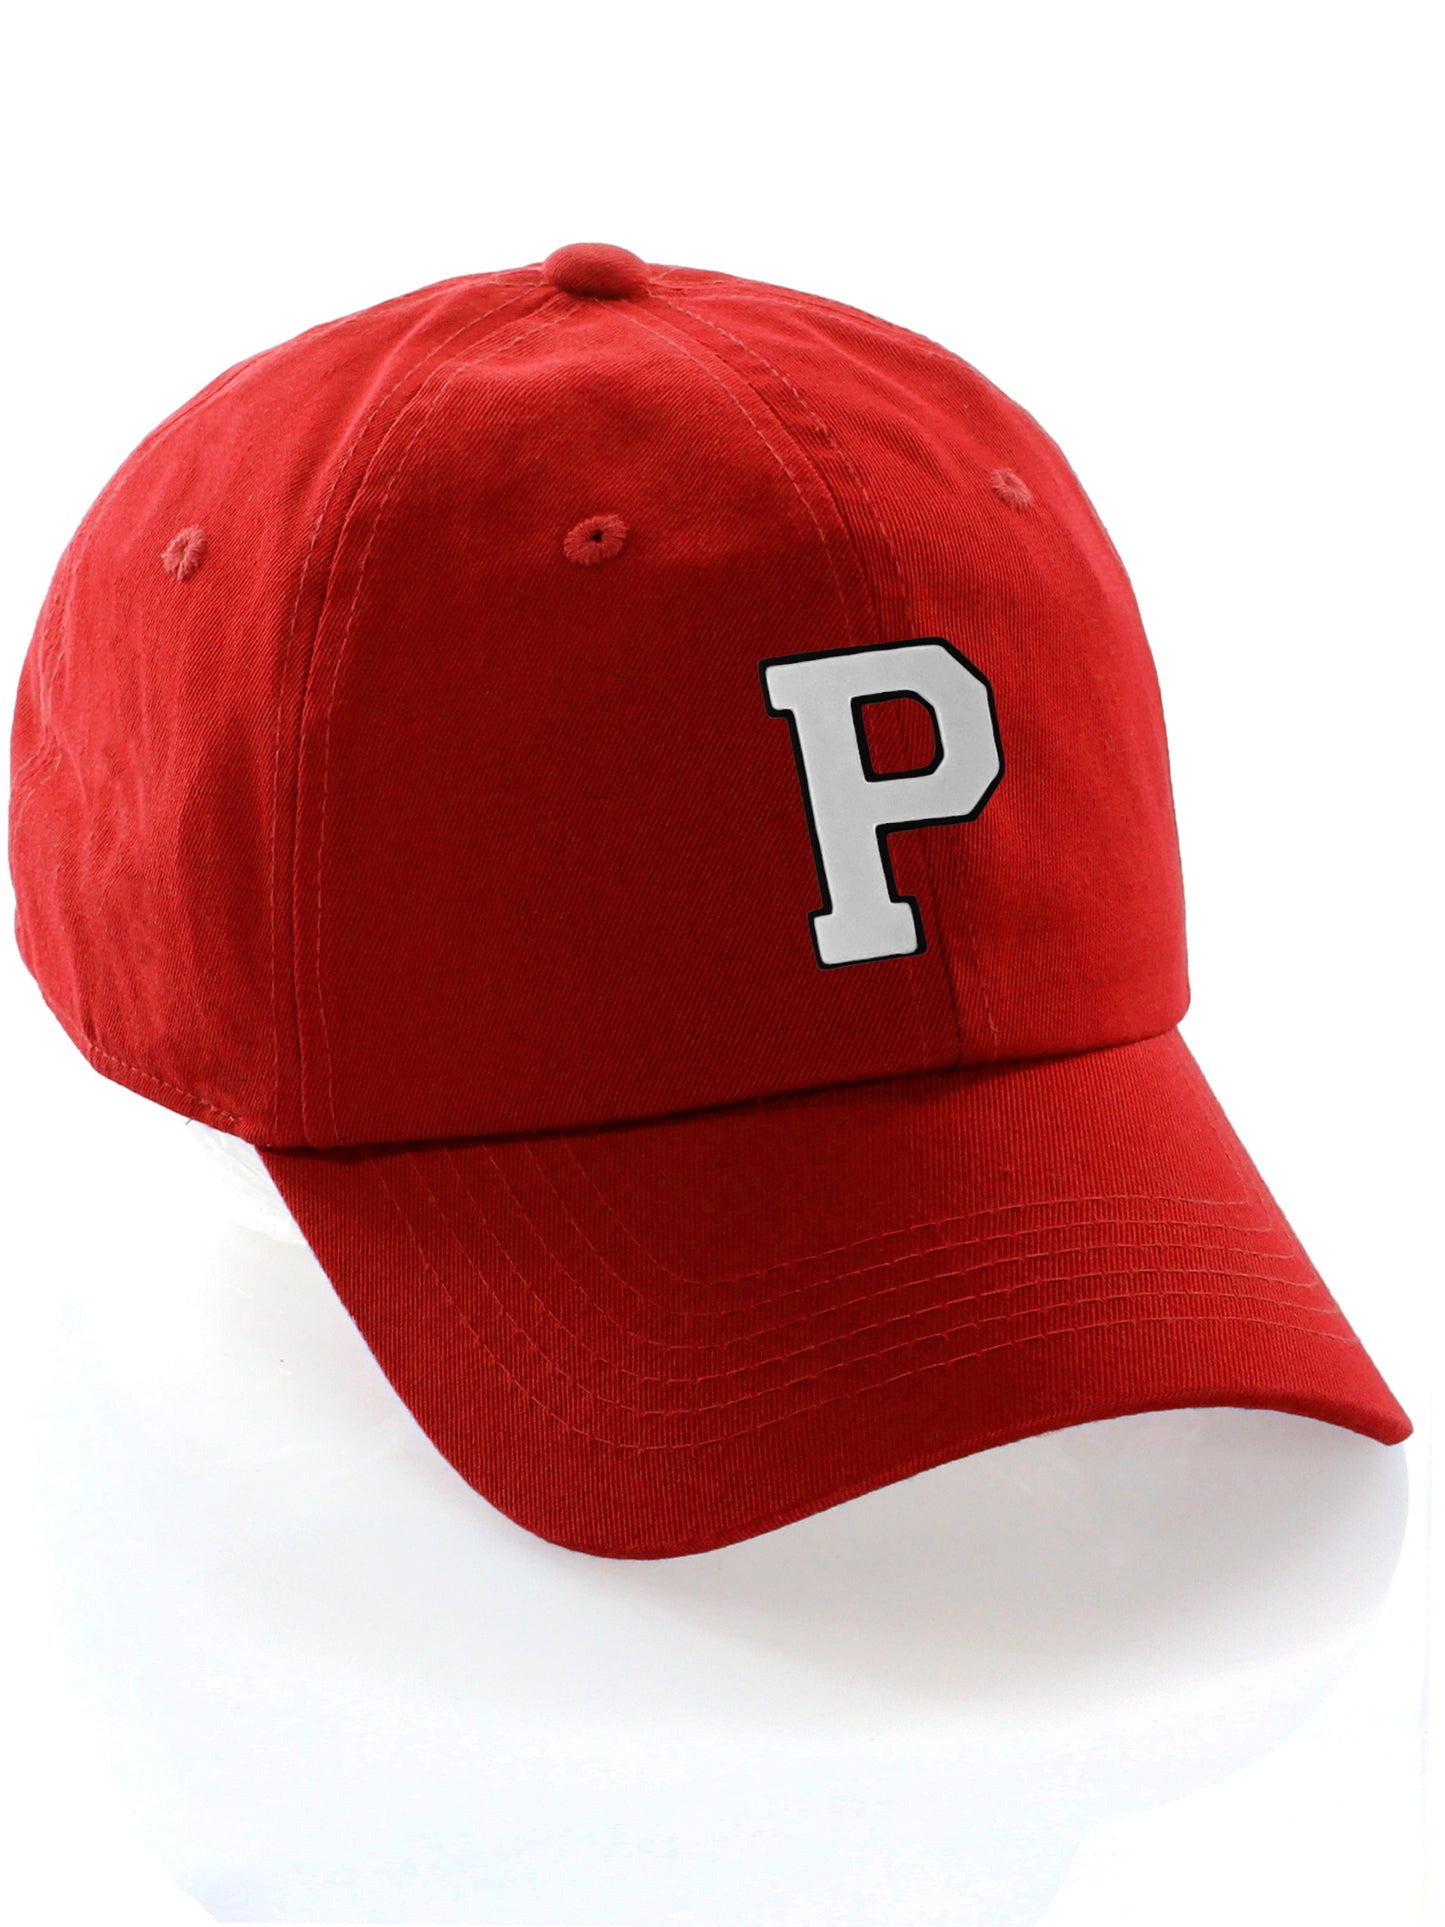 Customized letter Initial Baseball Hat A to Z Team Colors, Red Cap White Black